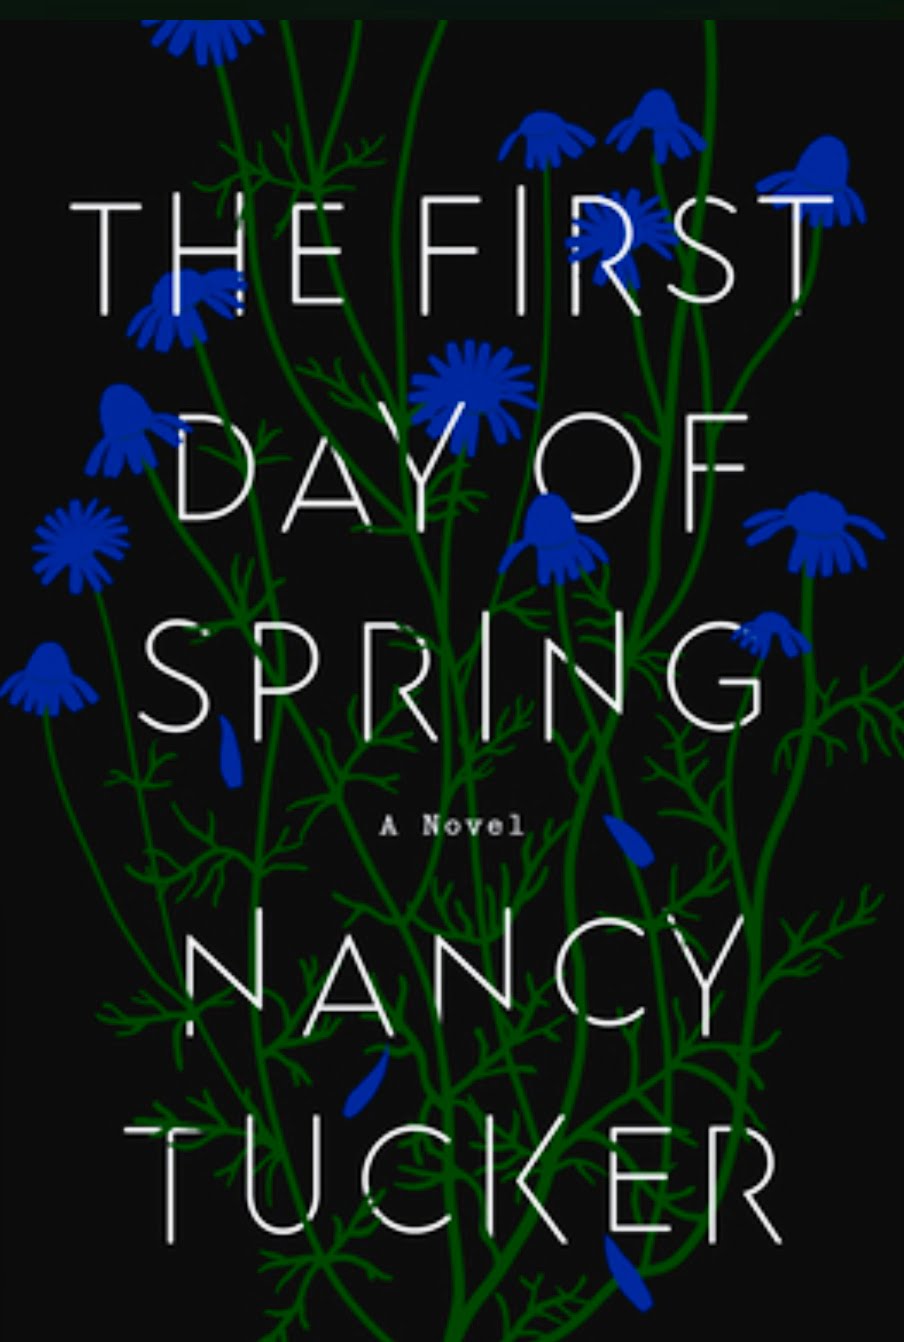 FIRST DAY OF SPRING BY NANCY TUCKER – BOOK REVIEW